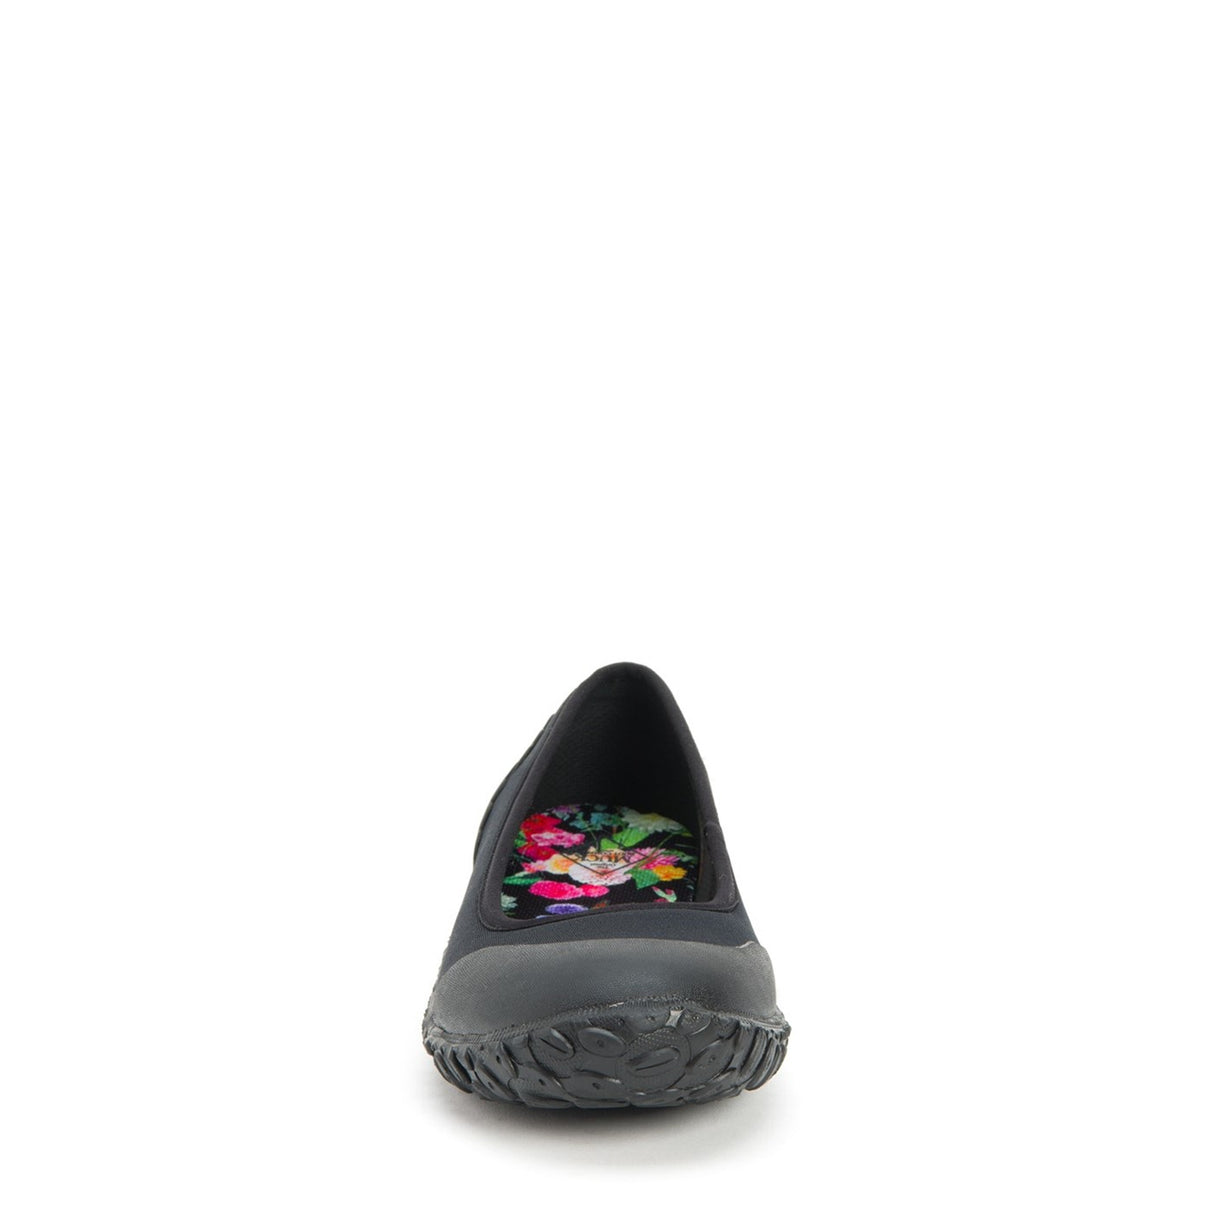 Women's RHS Muckster II Flats Black with Night Floral Print